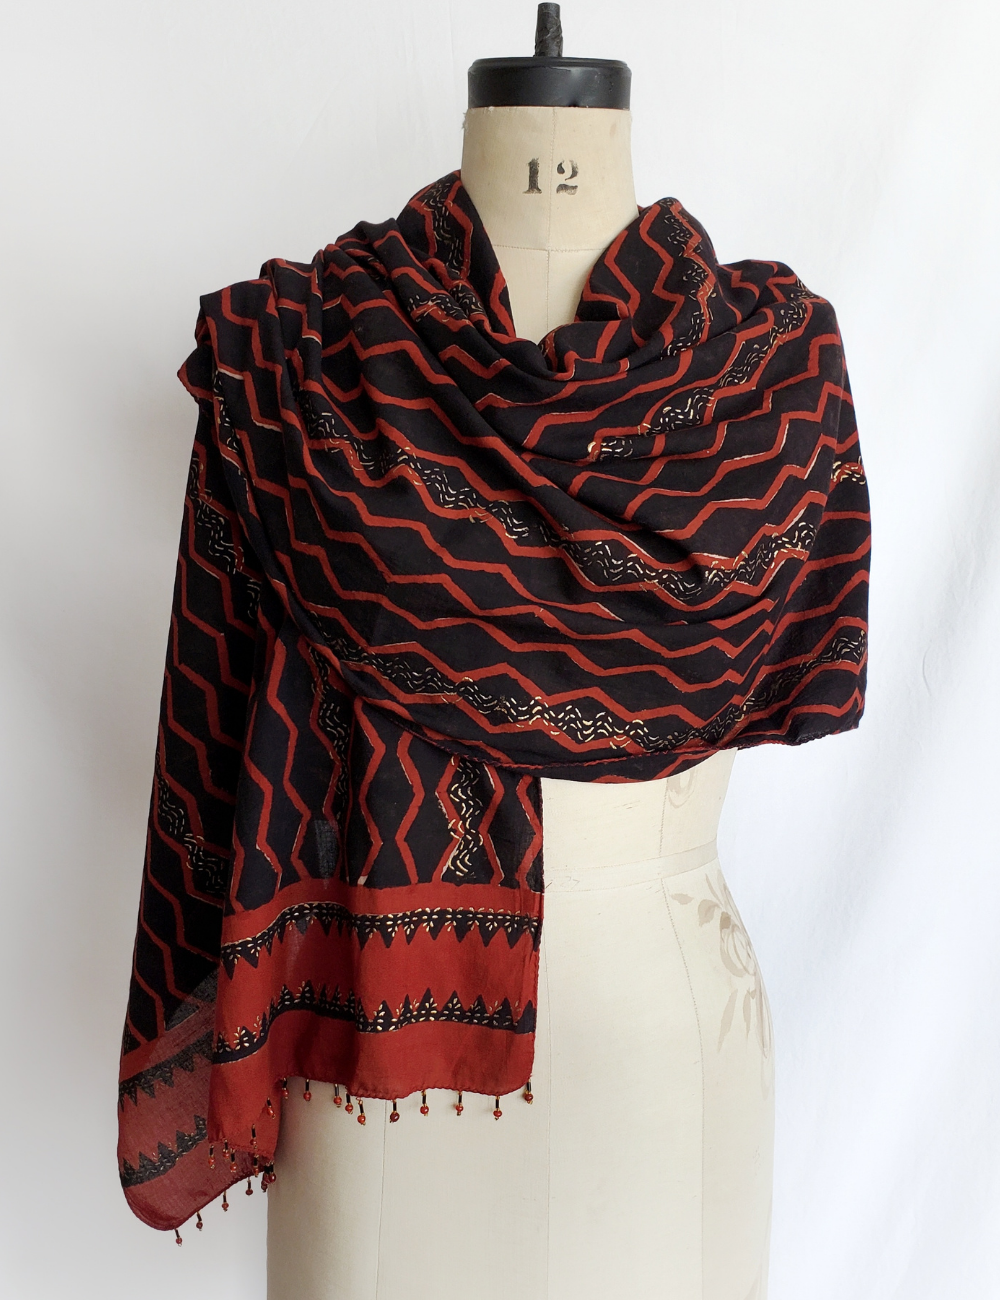 Rusty red and black long scarf with gold detailing.